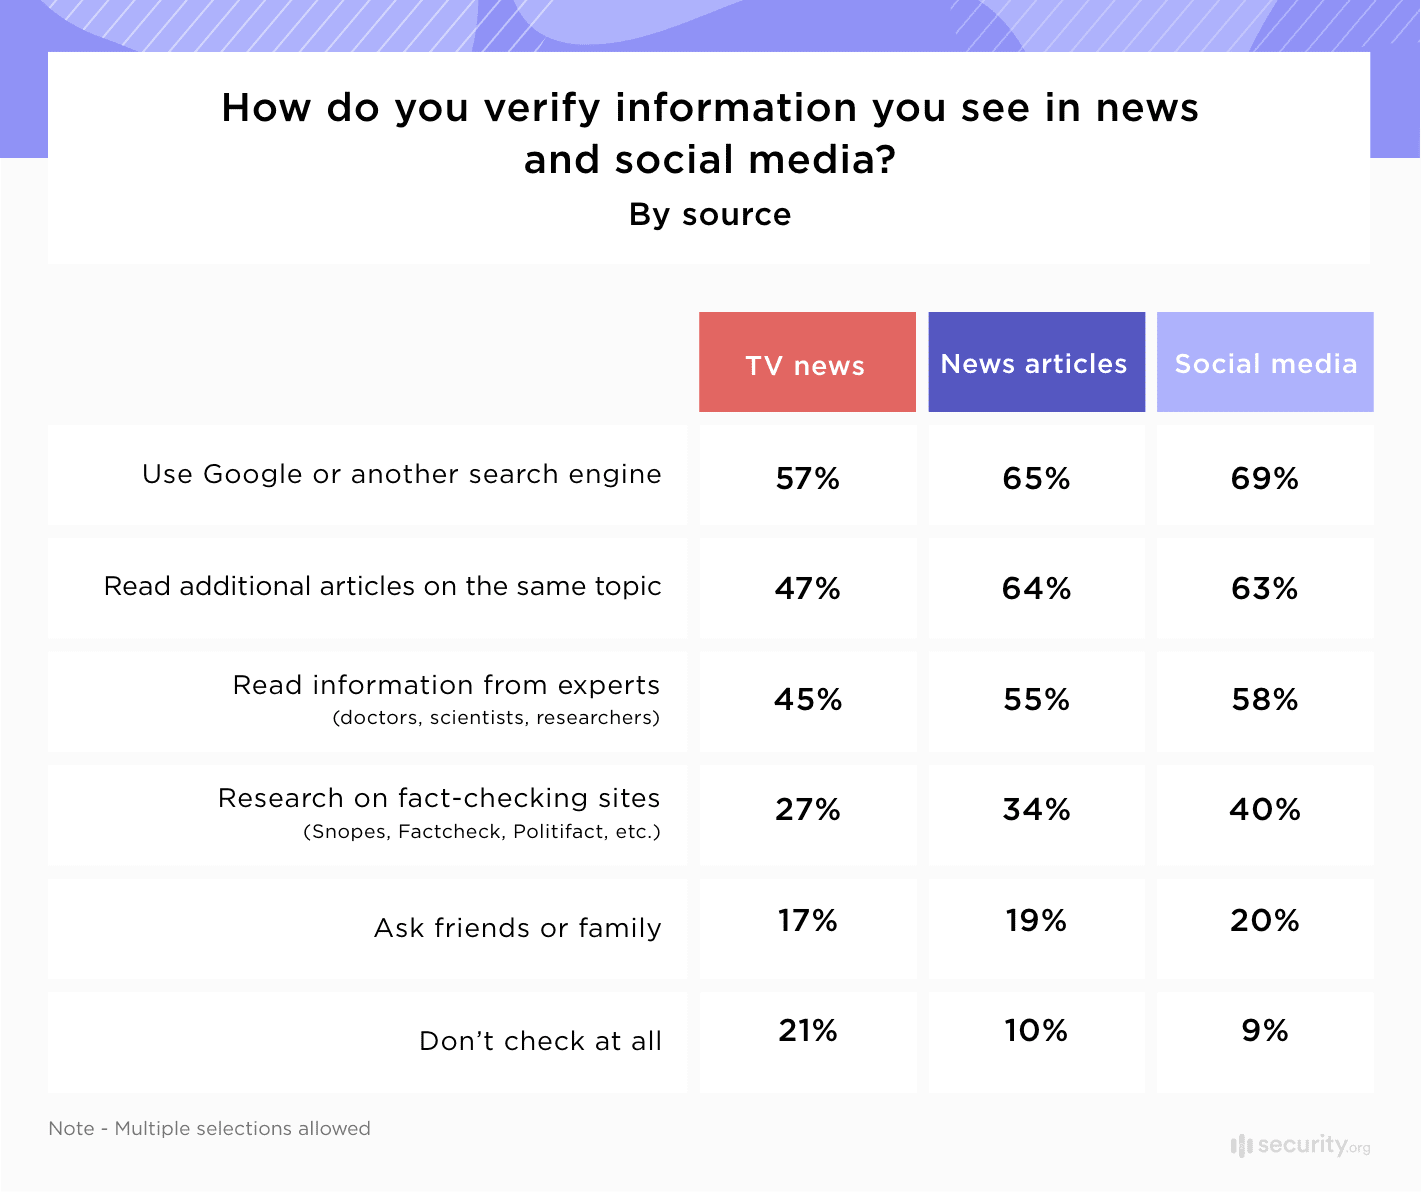 How do you verify information you see in news and social media